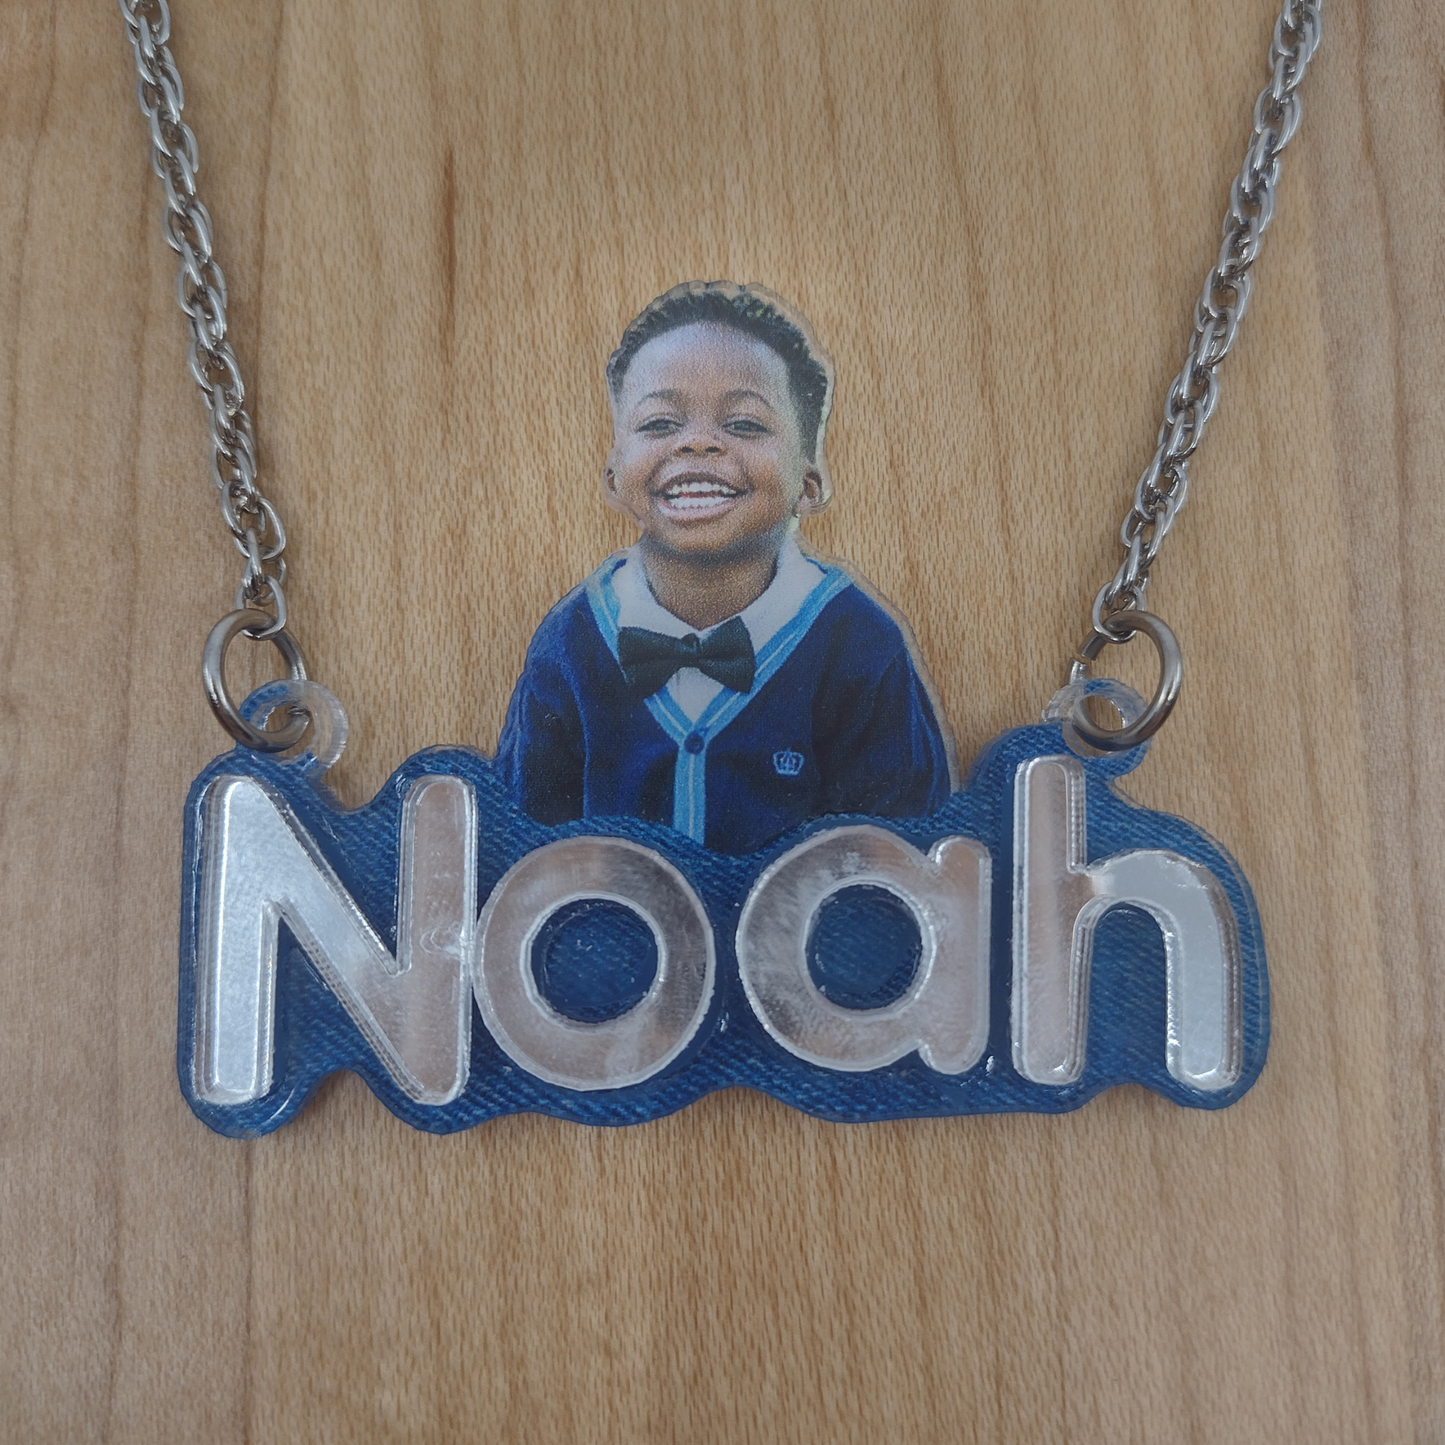 Custom Picture Photo Printed on Premium Clear Acrylic Necklace Pendant Personalized Free Laser Cut Name With Quality Choice Chain